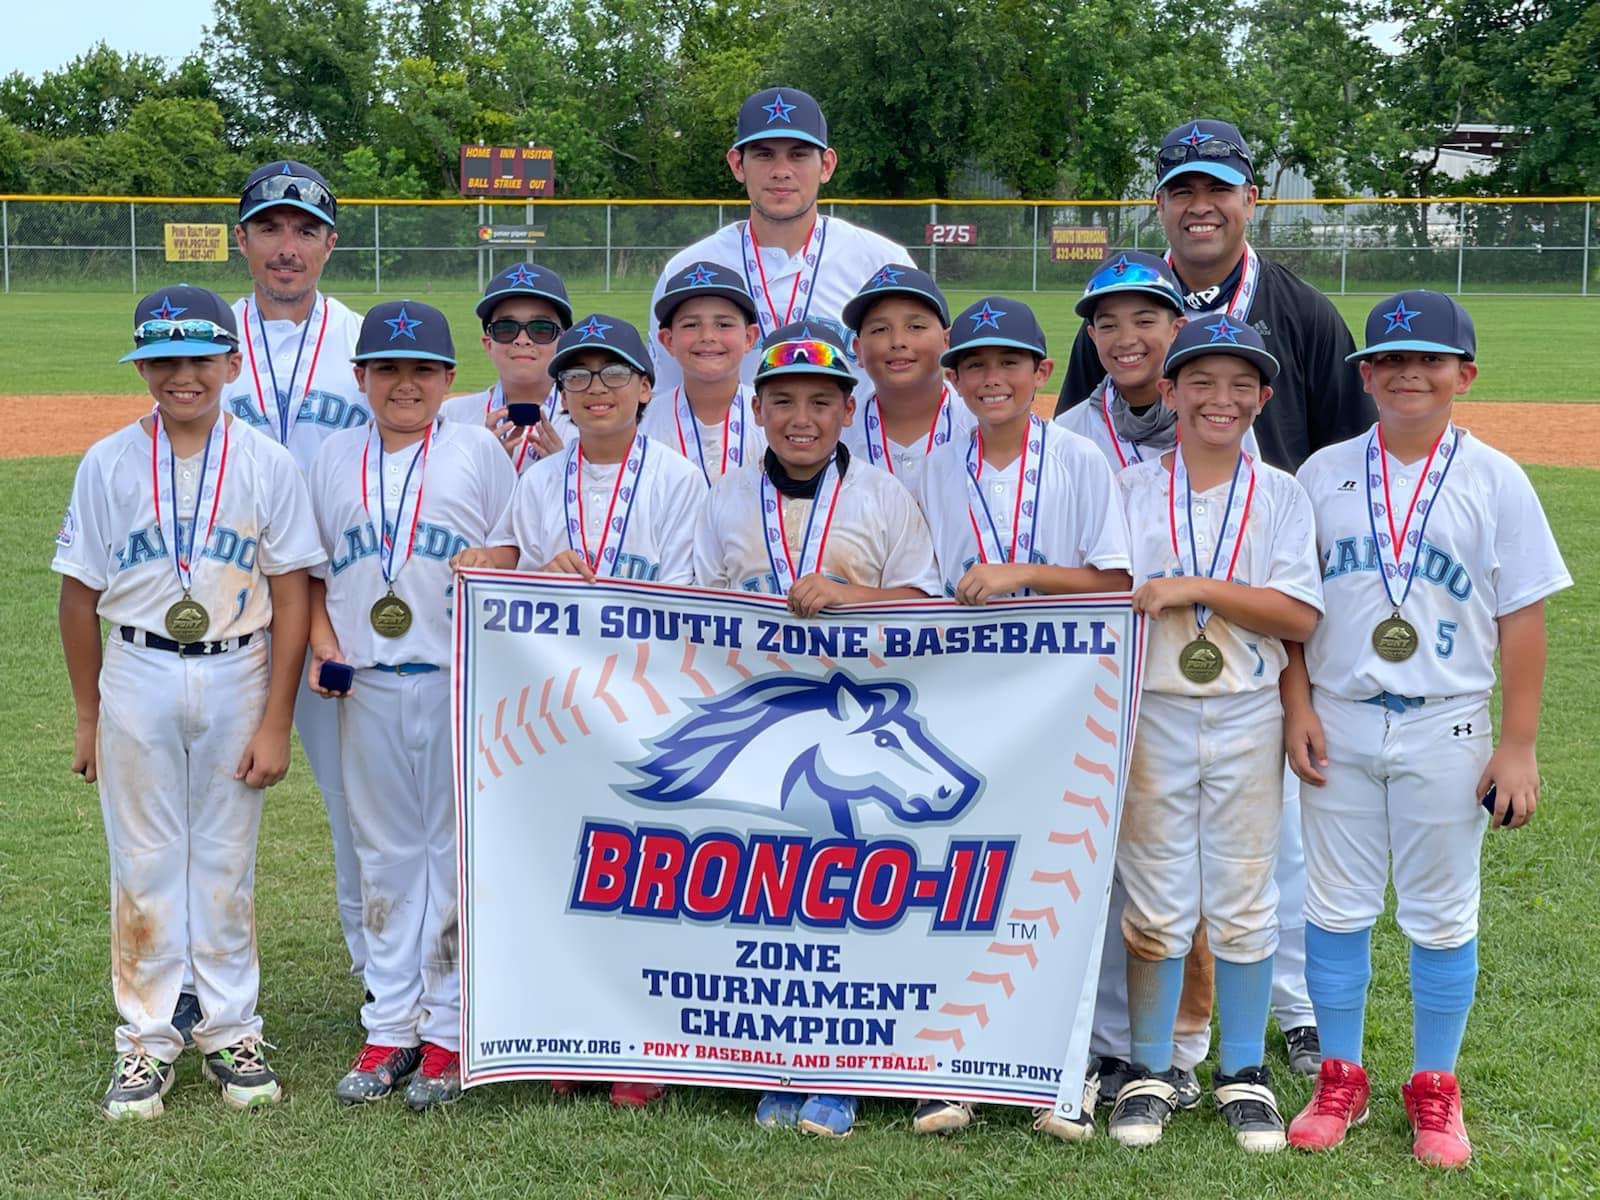 Two PONY teams clinch World Series spots